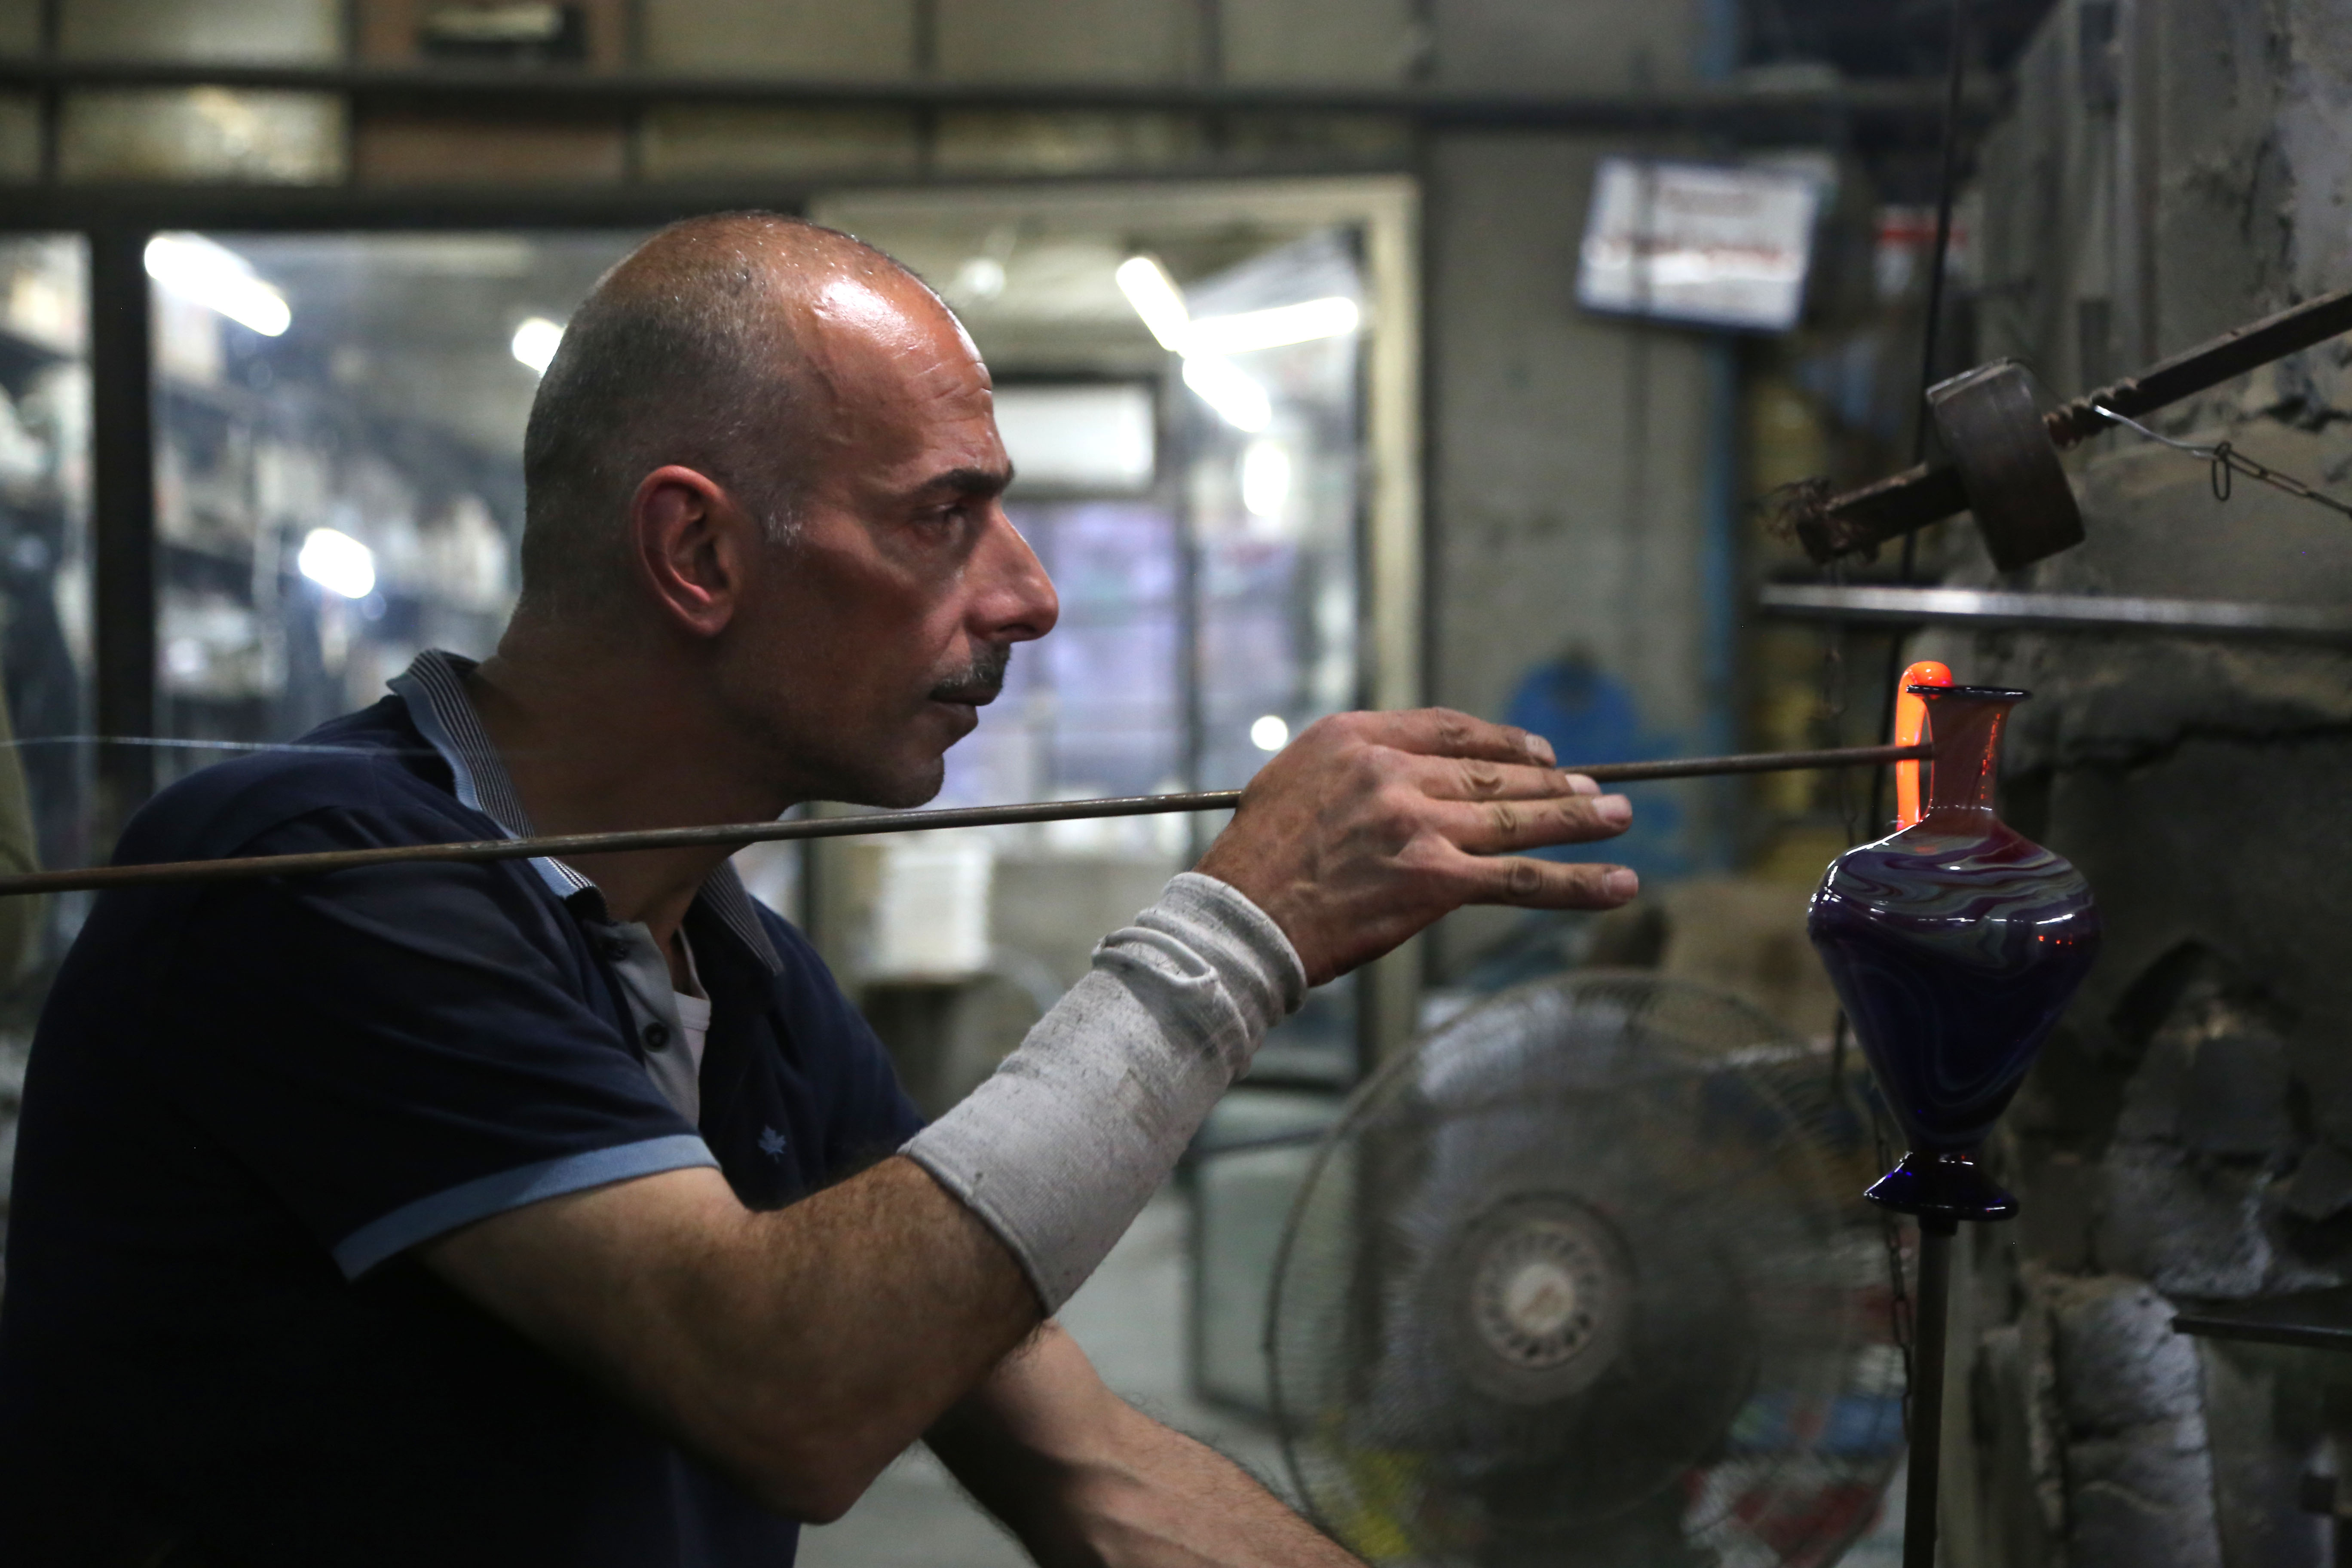  A glassblower works in the West Bank city of Hebron. The glass-blowing industry was established in Hebron during the time the Romans ruled the region, and the city has been known for its craft ever since.